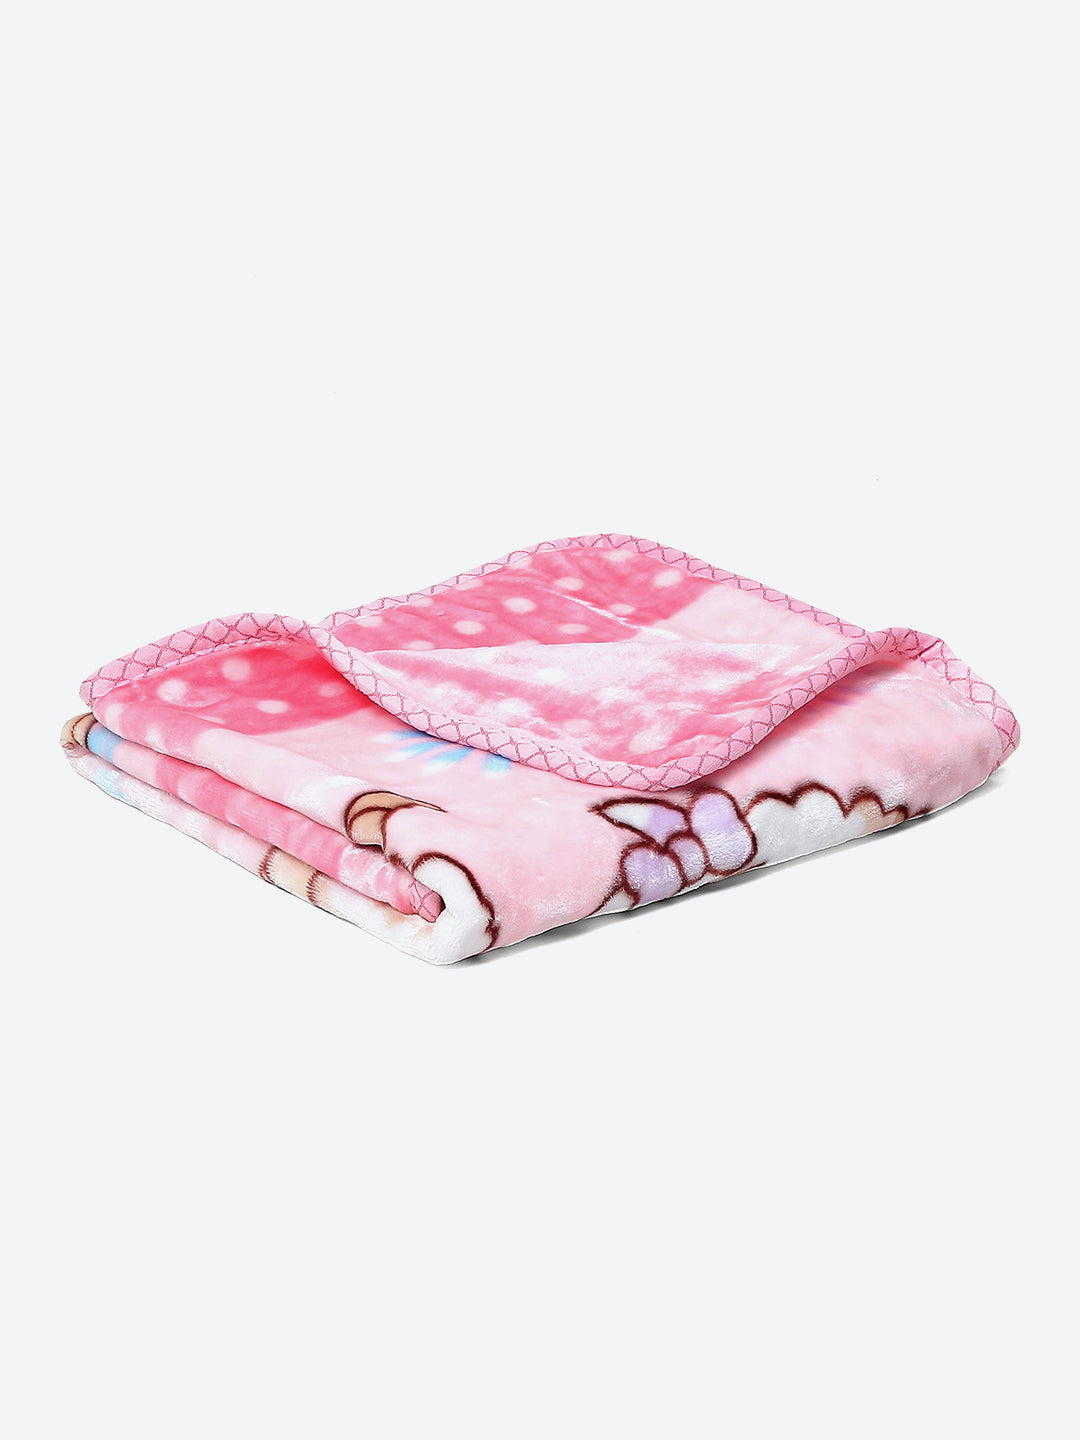 Printed Baby Blanket for Heavy Winter -2 Ply